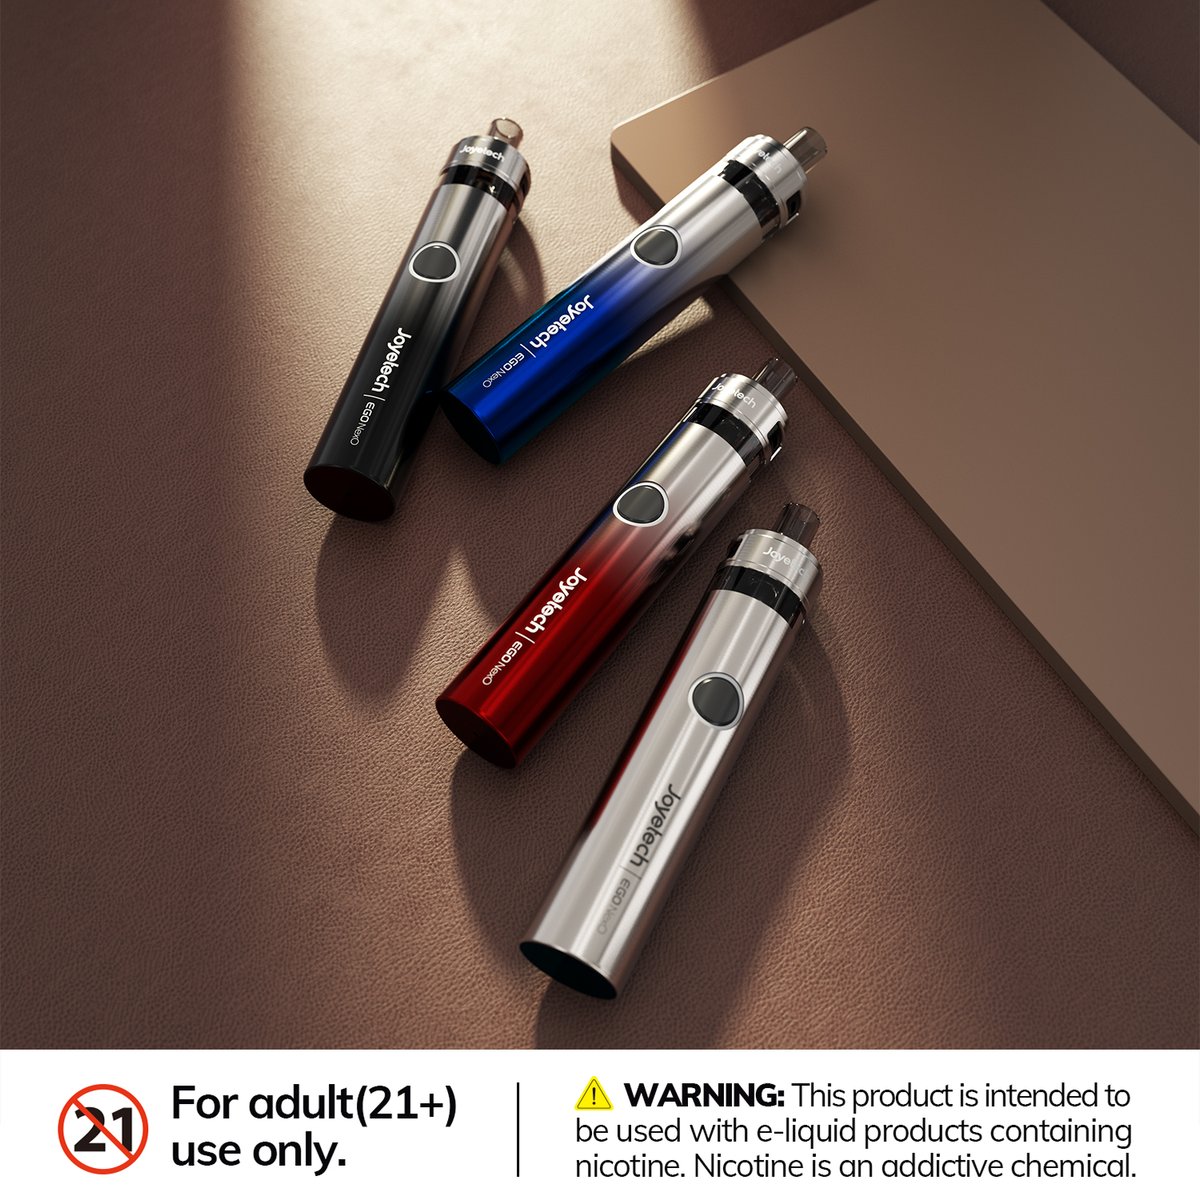 Joyetech eGo NexO Pod Kit 

😍Built-in 1500mAh battery
🥰Dual-top system
😘Fit for EN Coil

 ⚠ Warning: The device is used with e-liquid which contains addictive chemical nicotine. For Adult use only.

#sourcemore #sourcemoreofficial #Joyetech #eGoNexO